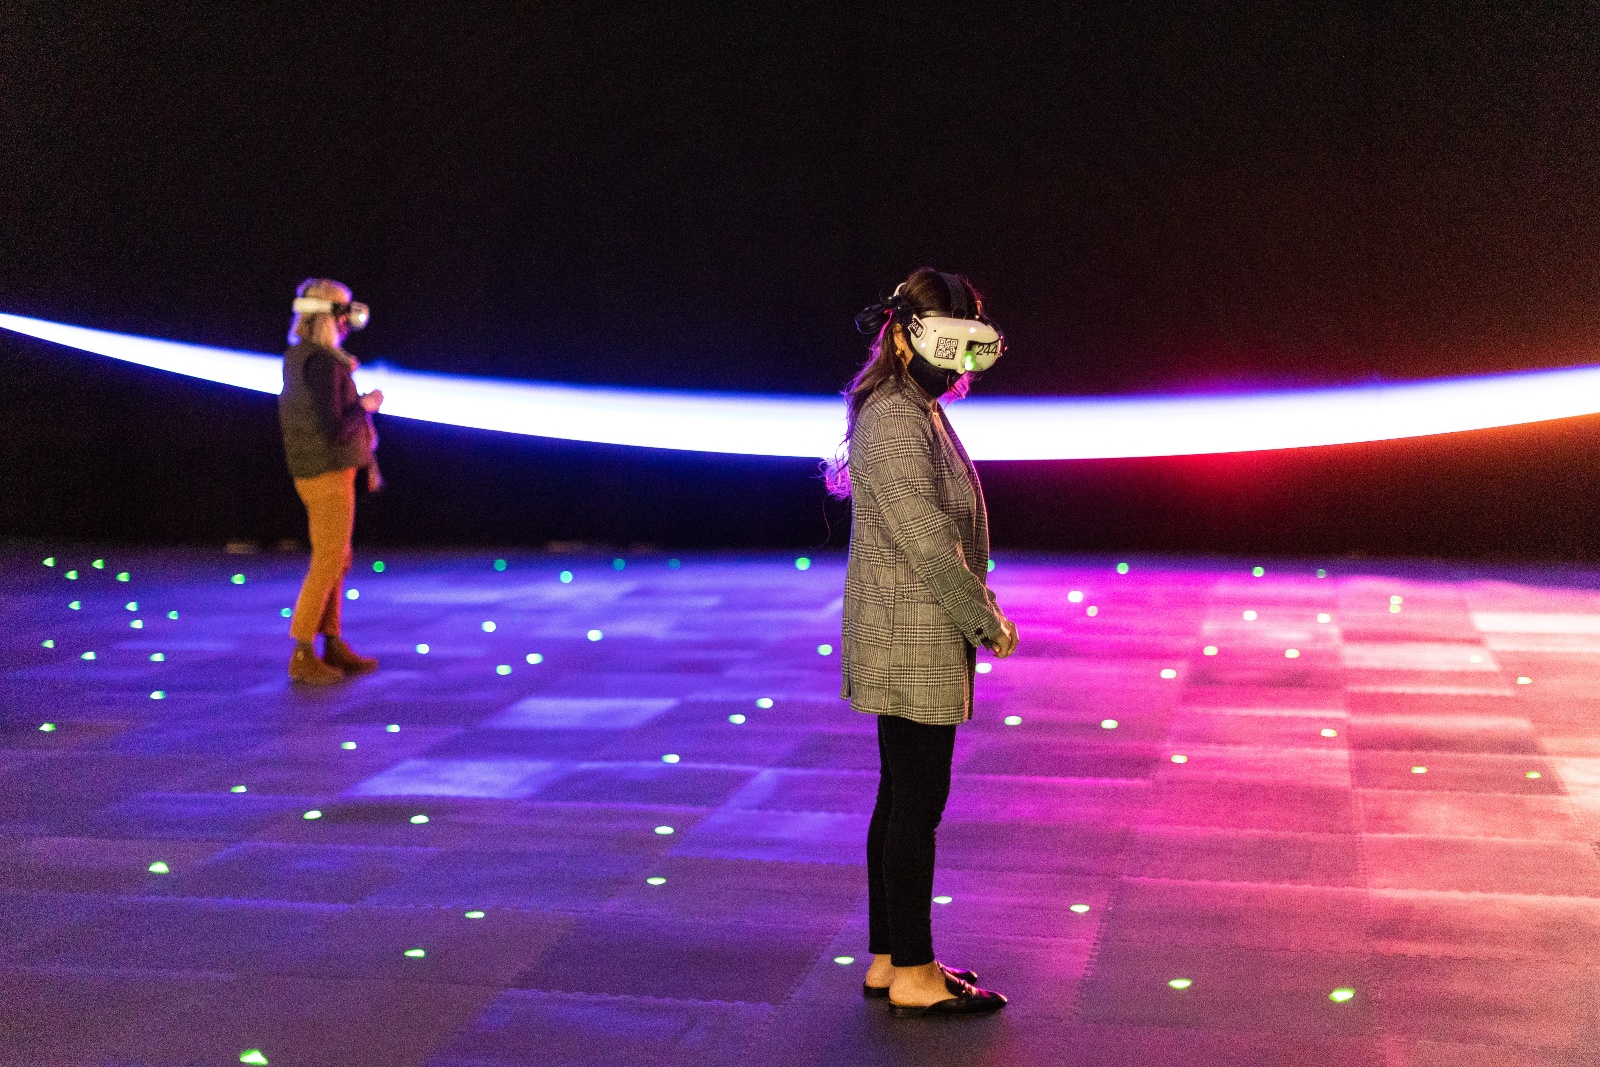 People wearing headsets stand on a purple gradient floor against a dark background with a white crescent across it.